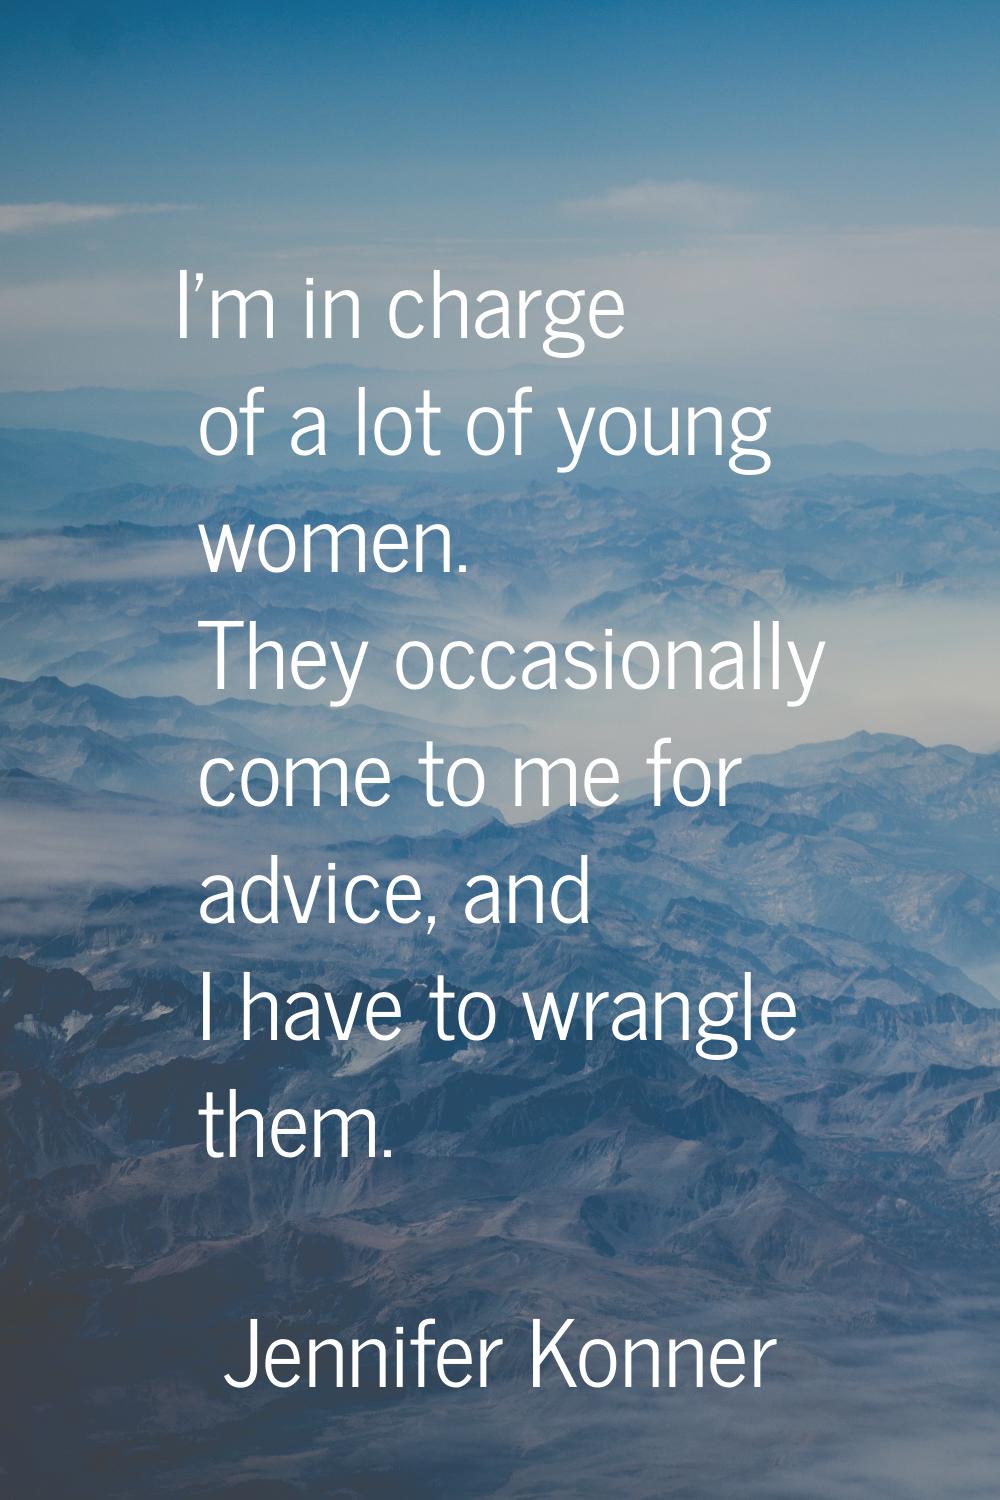 I'm in charge of a lot of young women. They occasionally come to me for advice, and I have to wrang